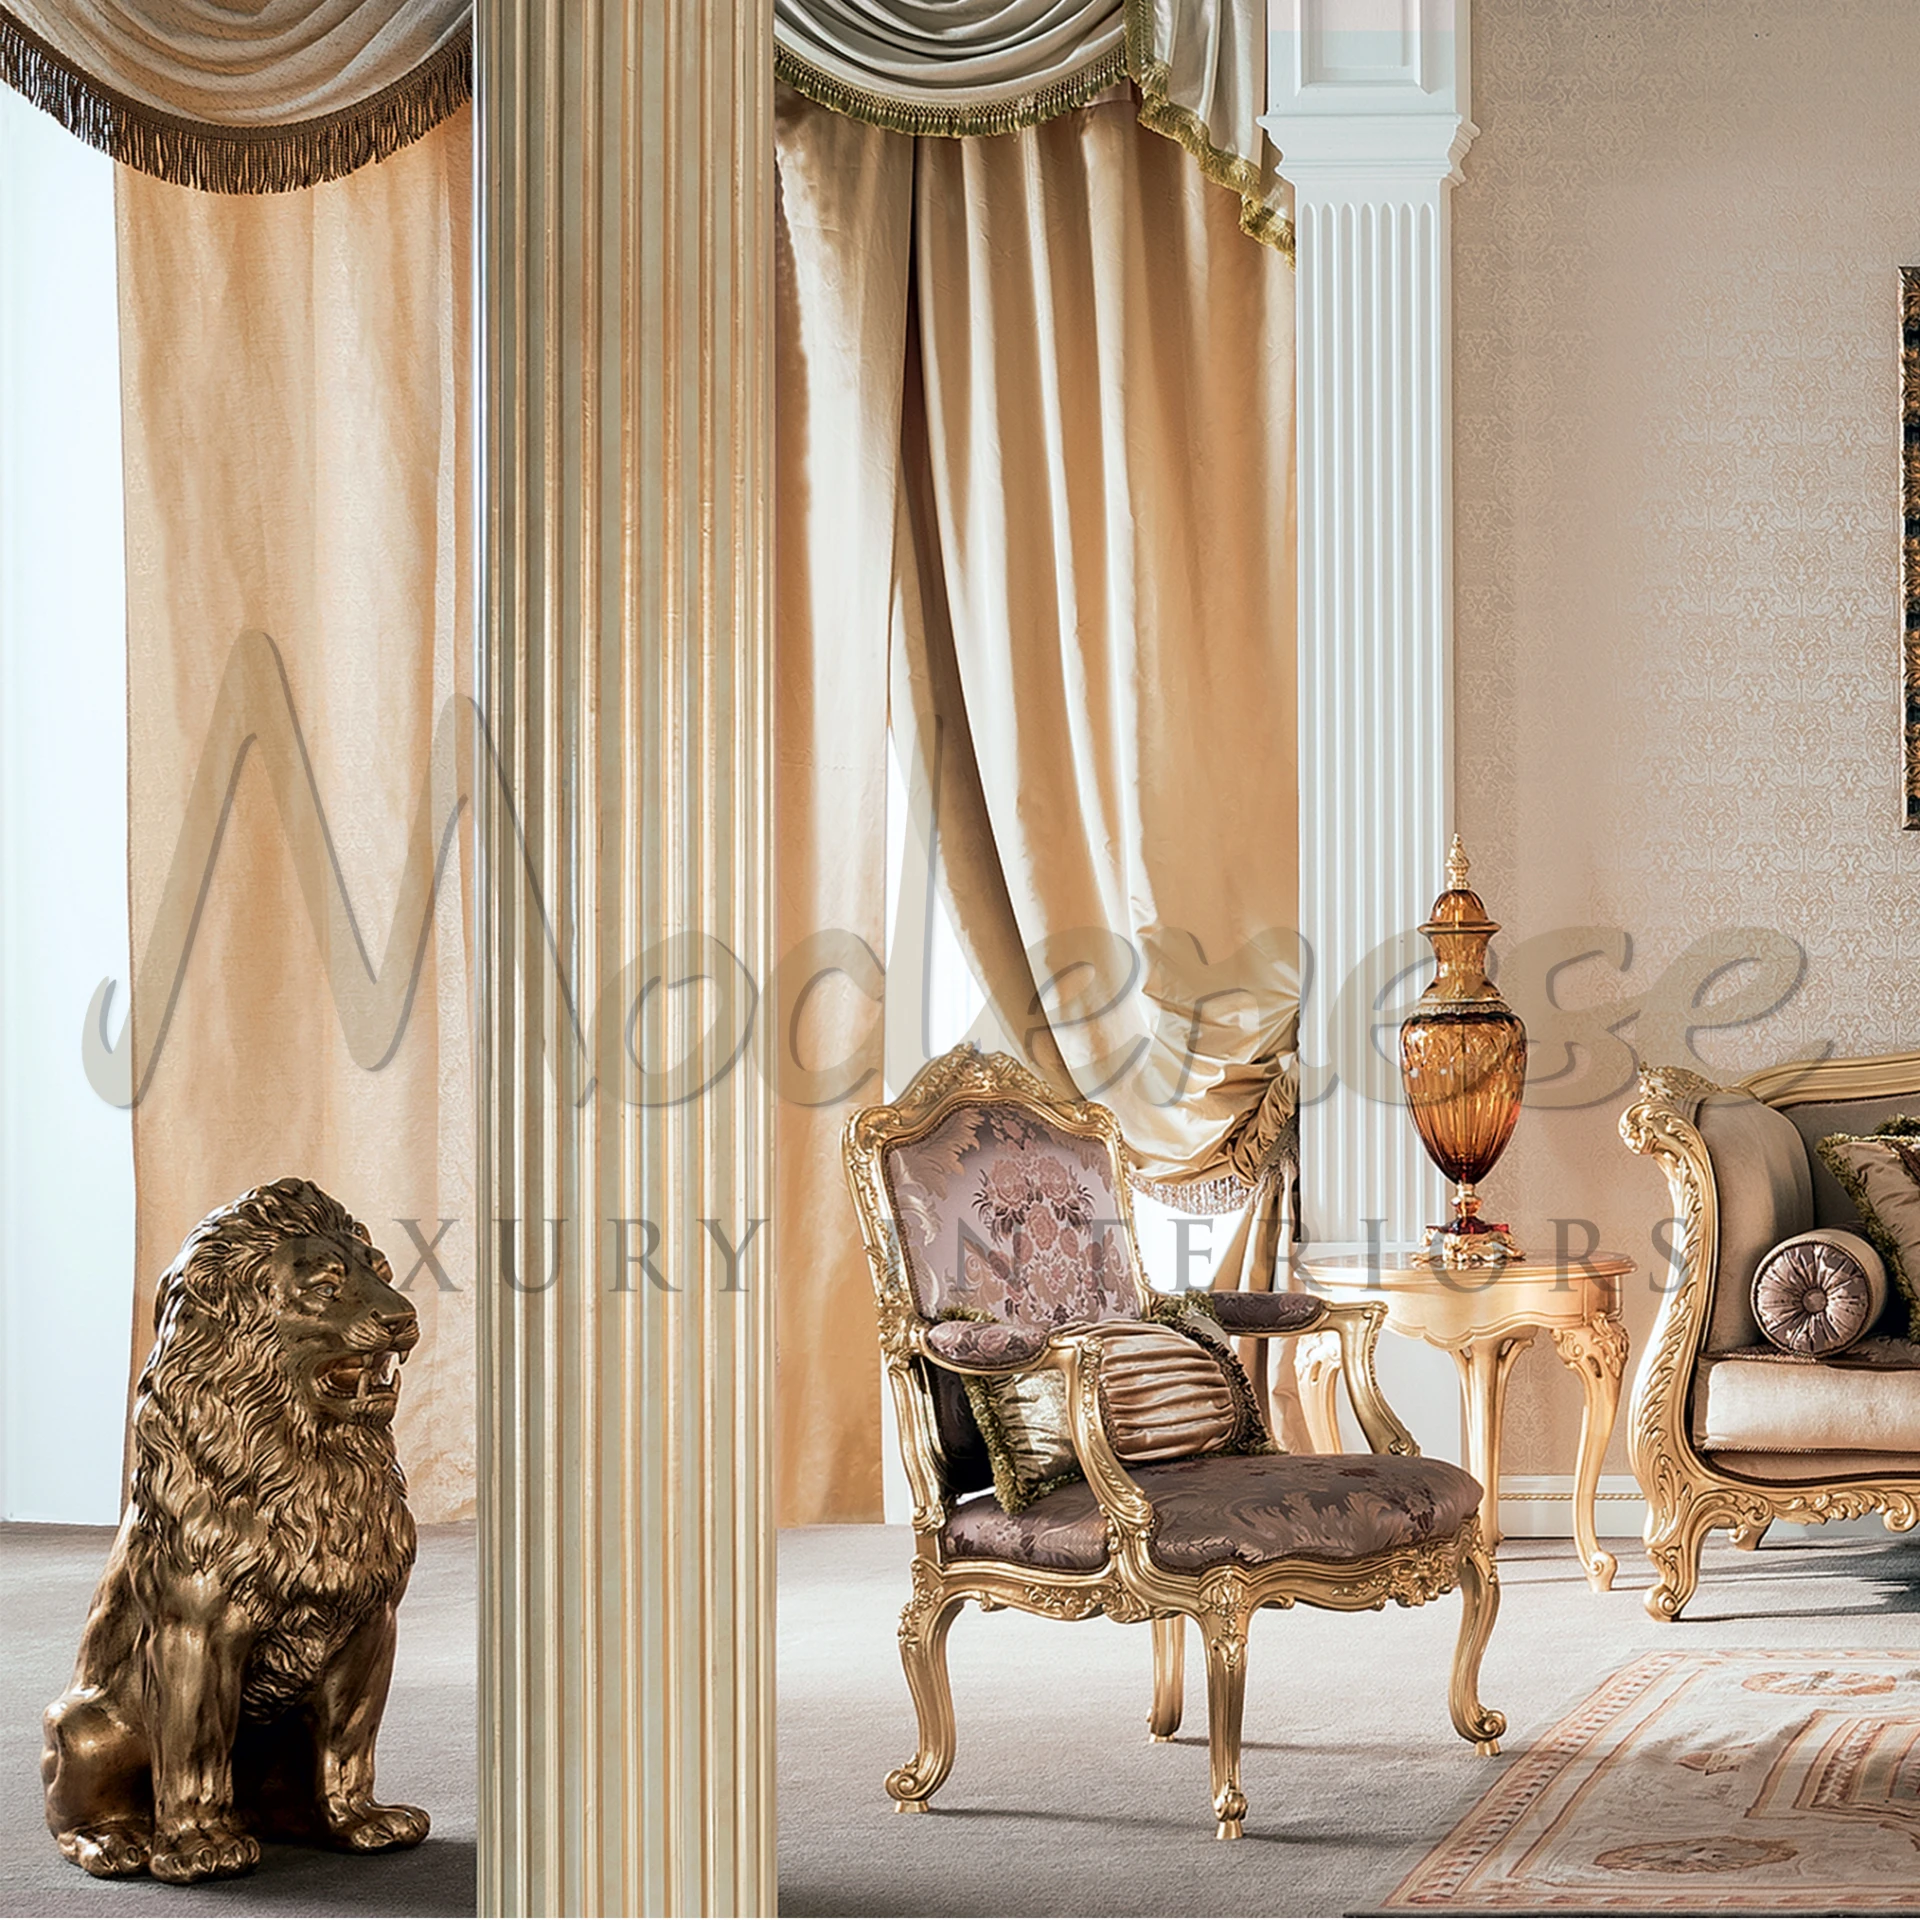 Luxury Beige Armchair from Modenese Furniture, showcasing classical design with solid wood frame and pattern fabric.
